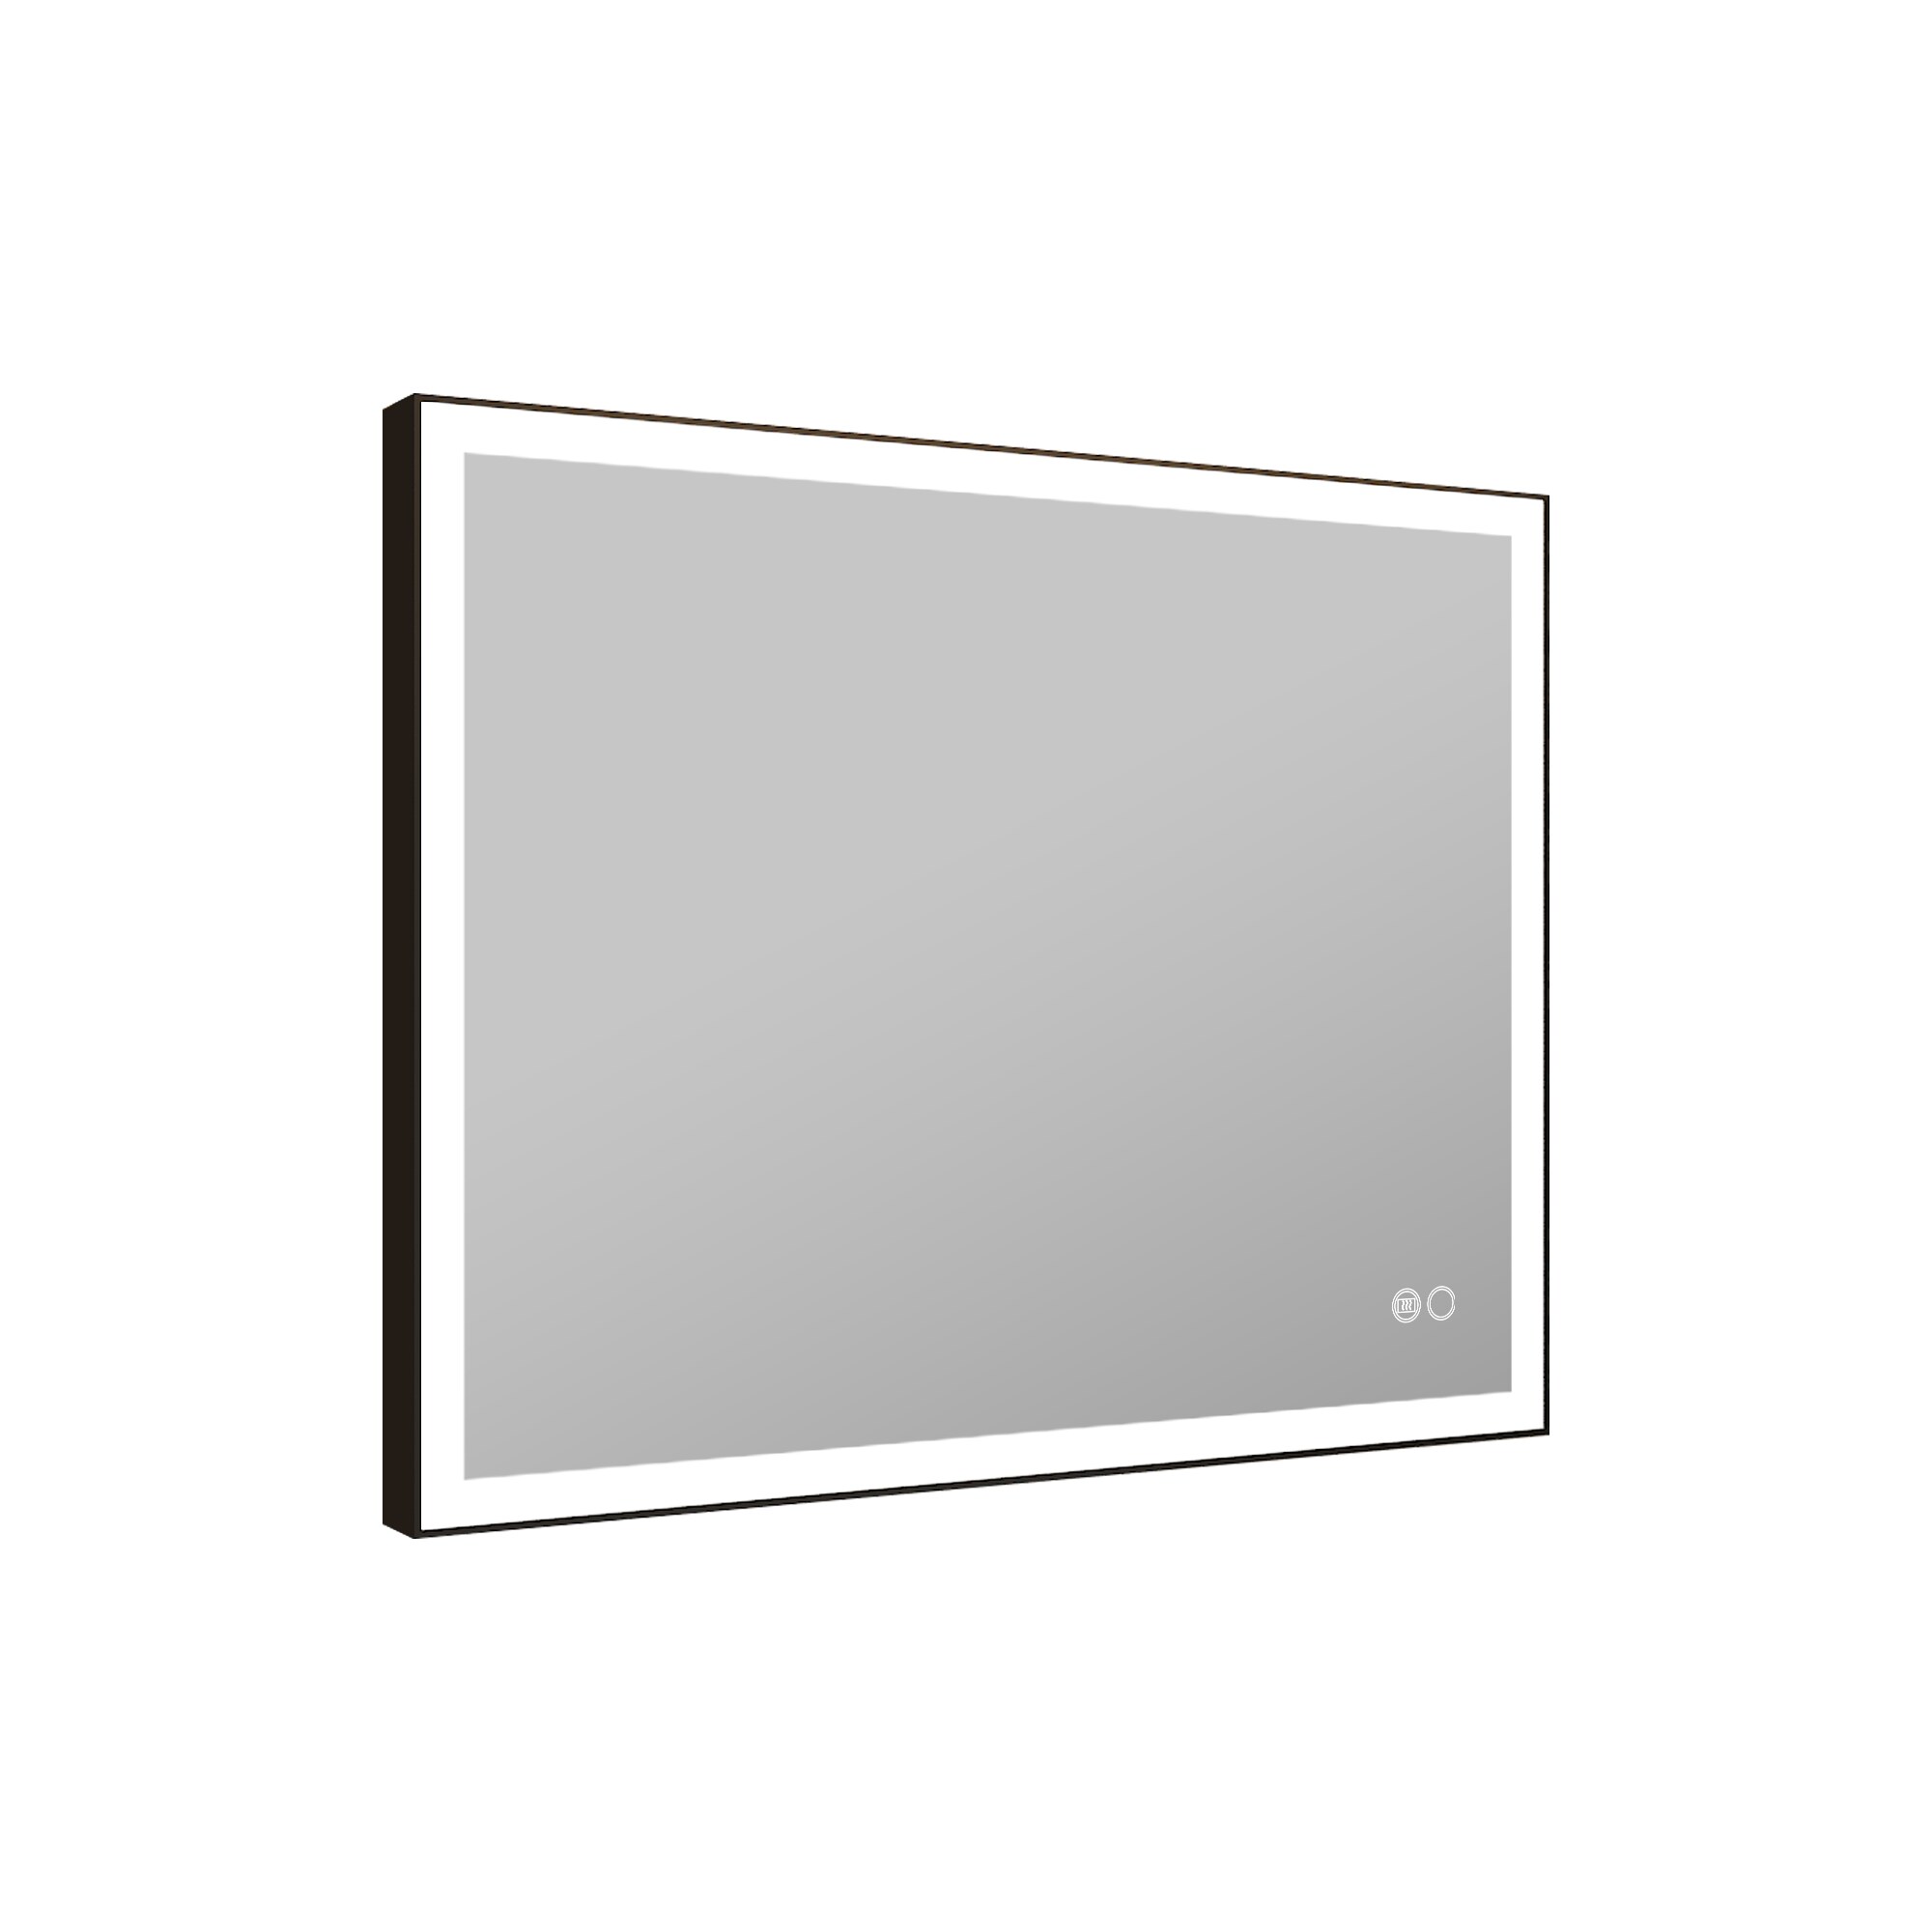 WELLFOR W5 Dimmable LED Lighting Bathroom mirror 40-in x 32-in Framed ...